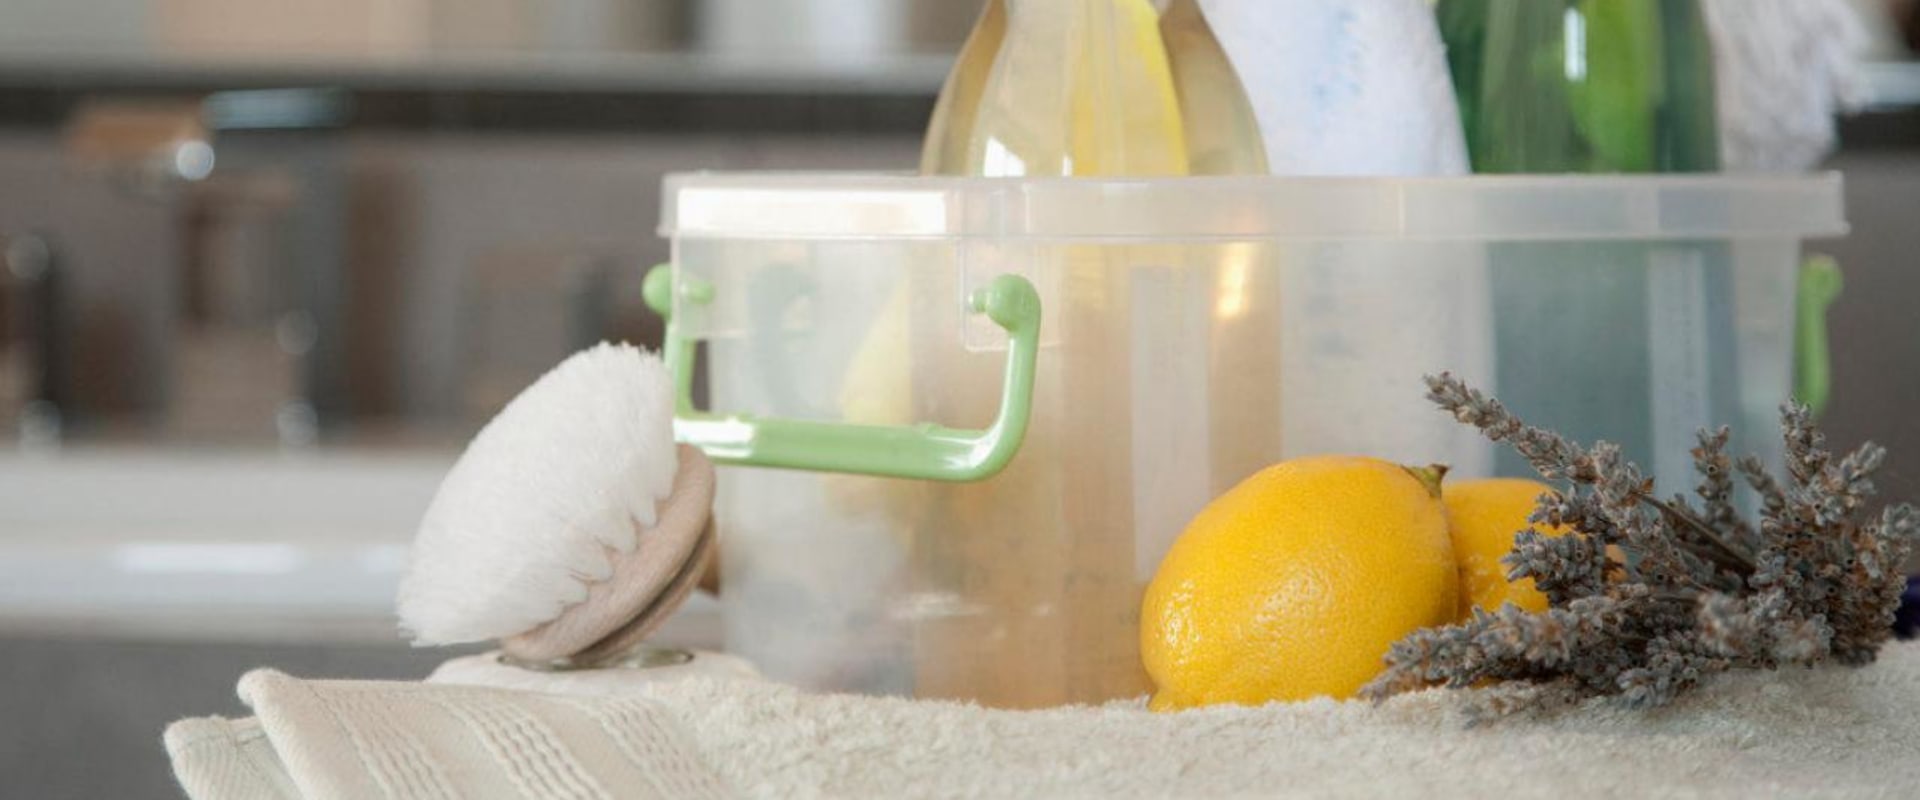 What is a homemade cleaning agent?